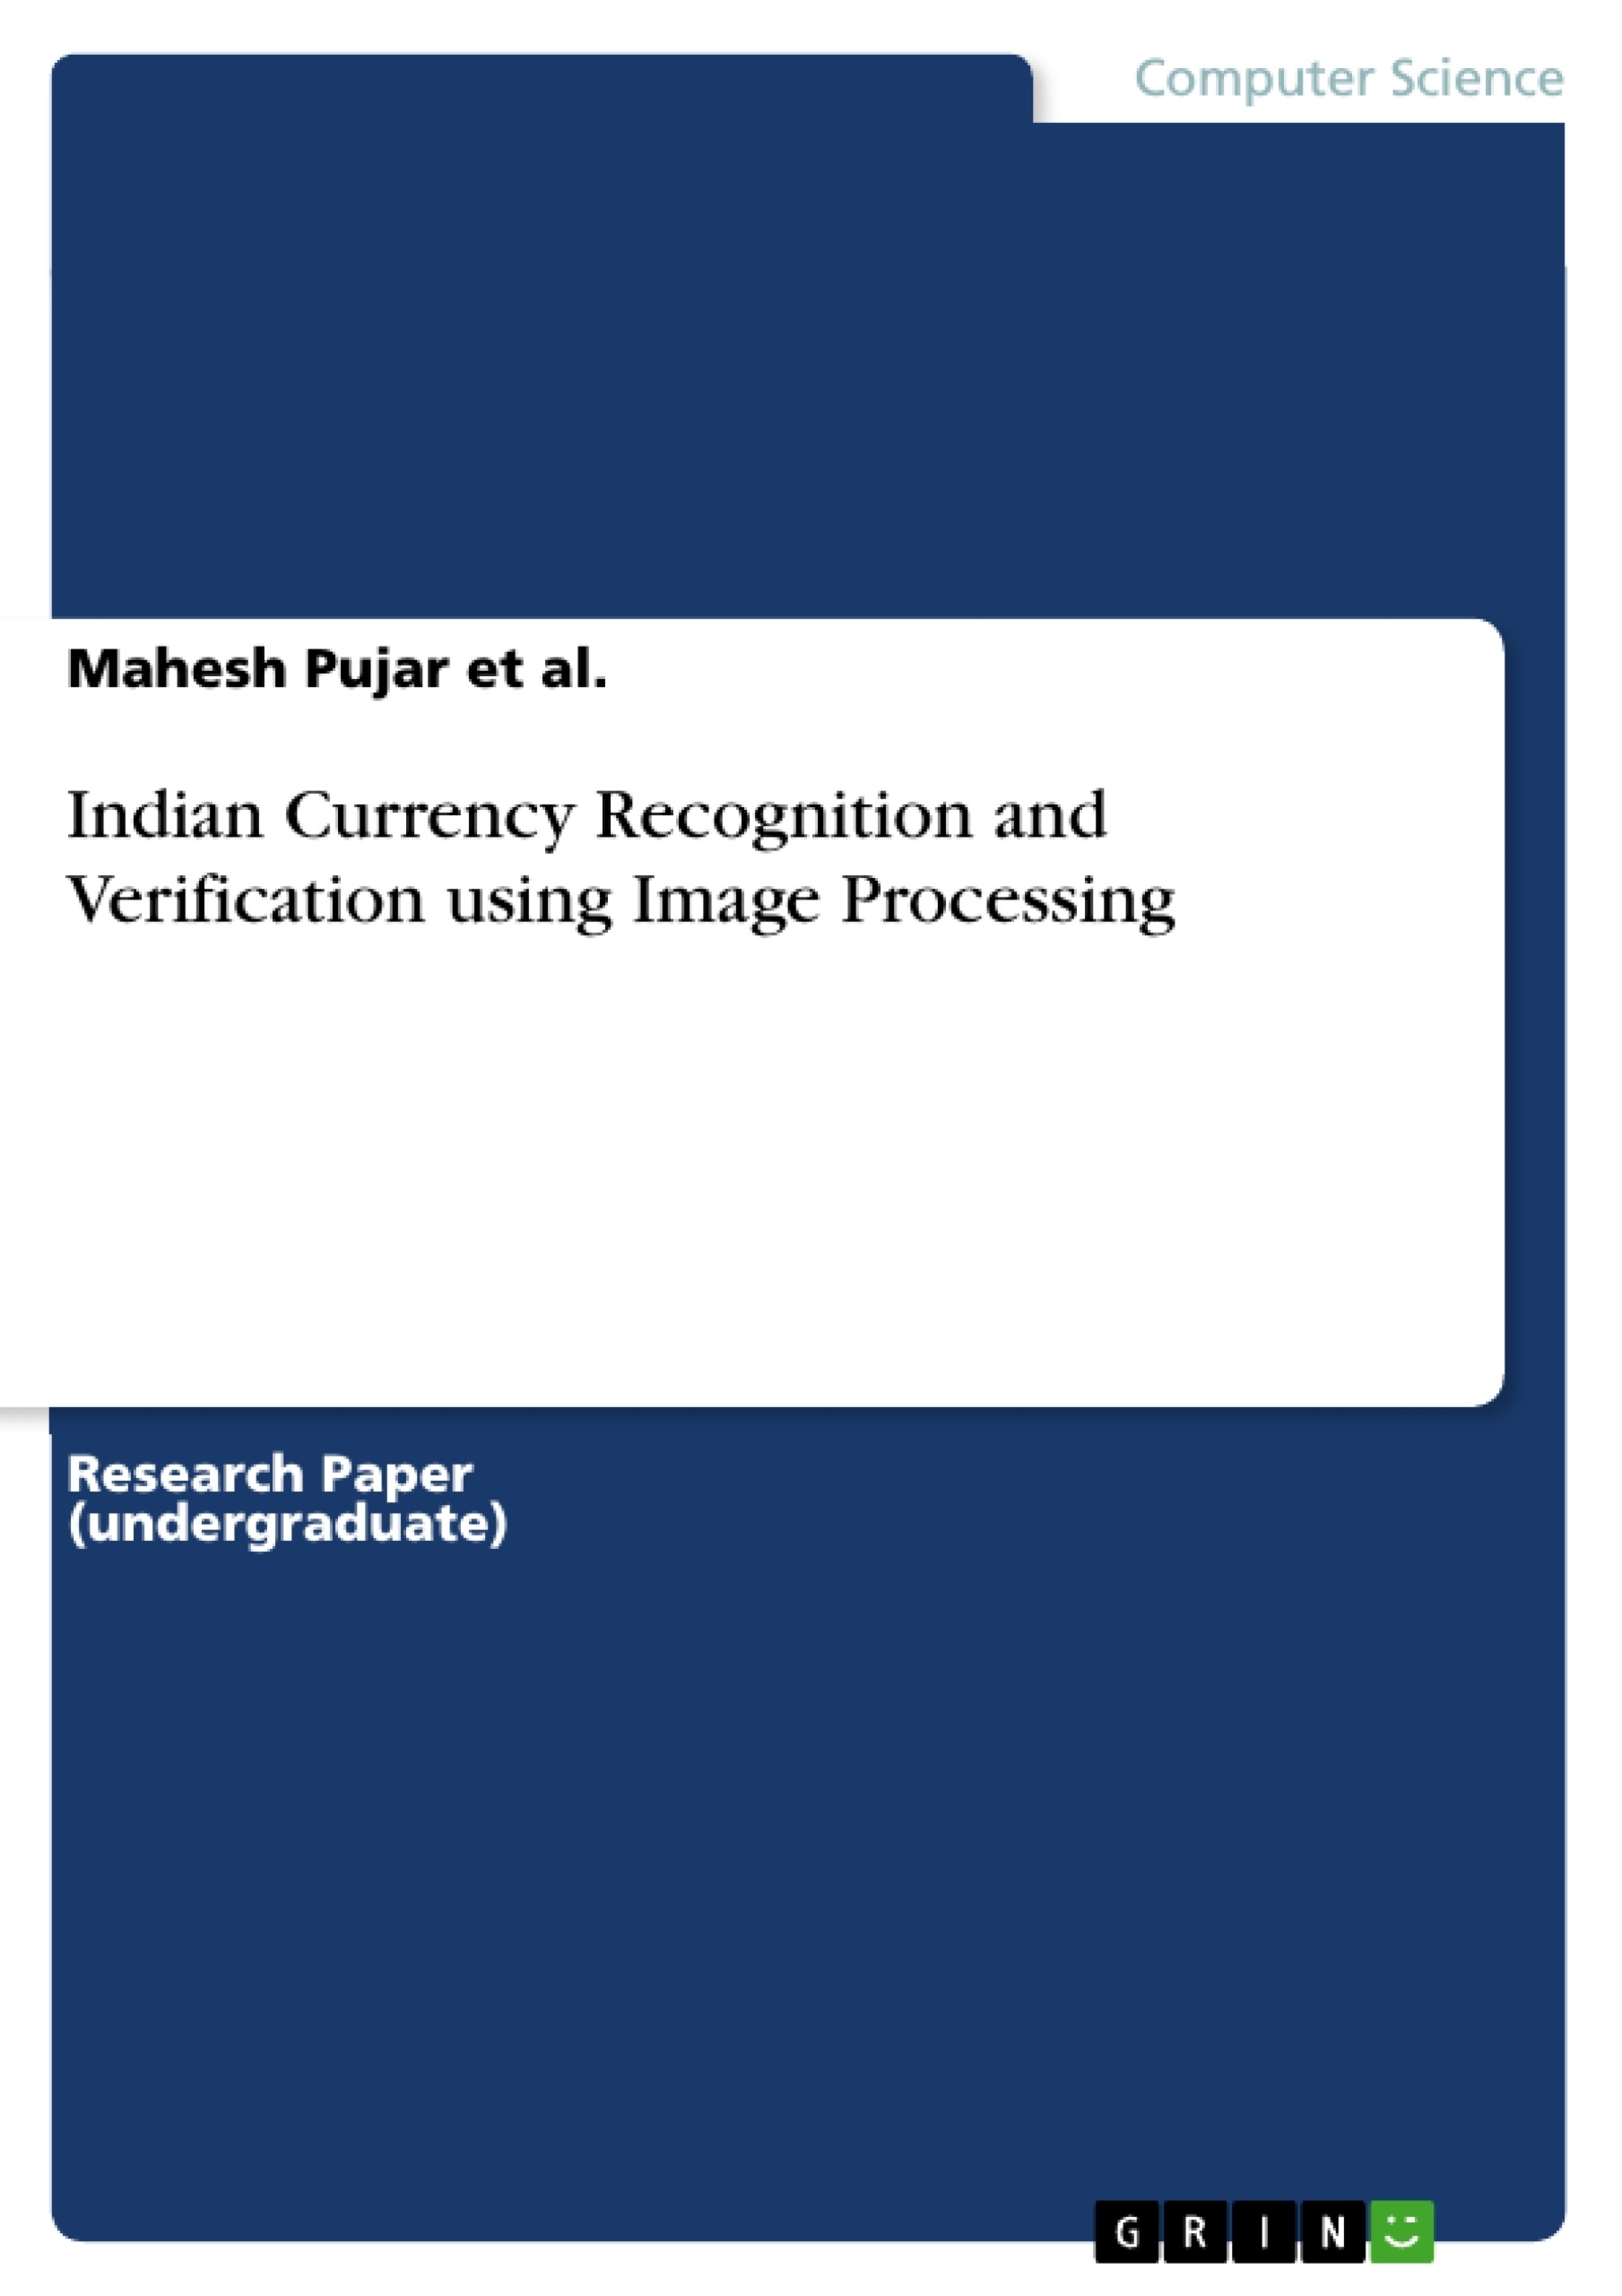 Master thesis in image processing